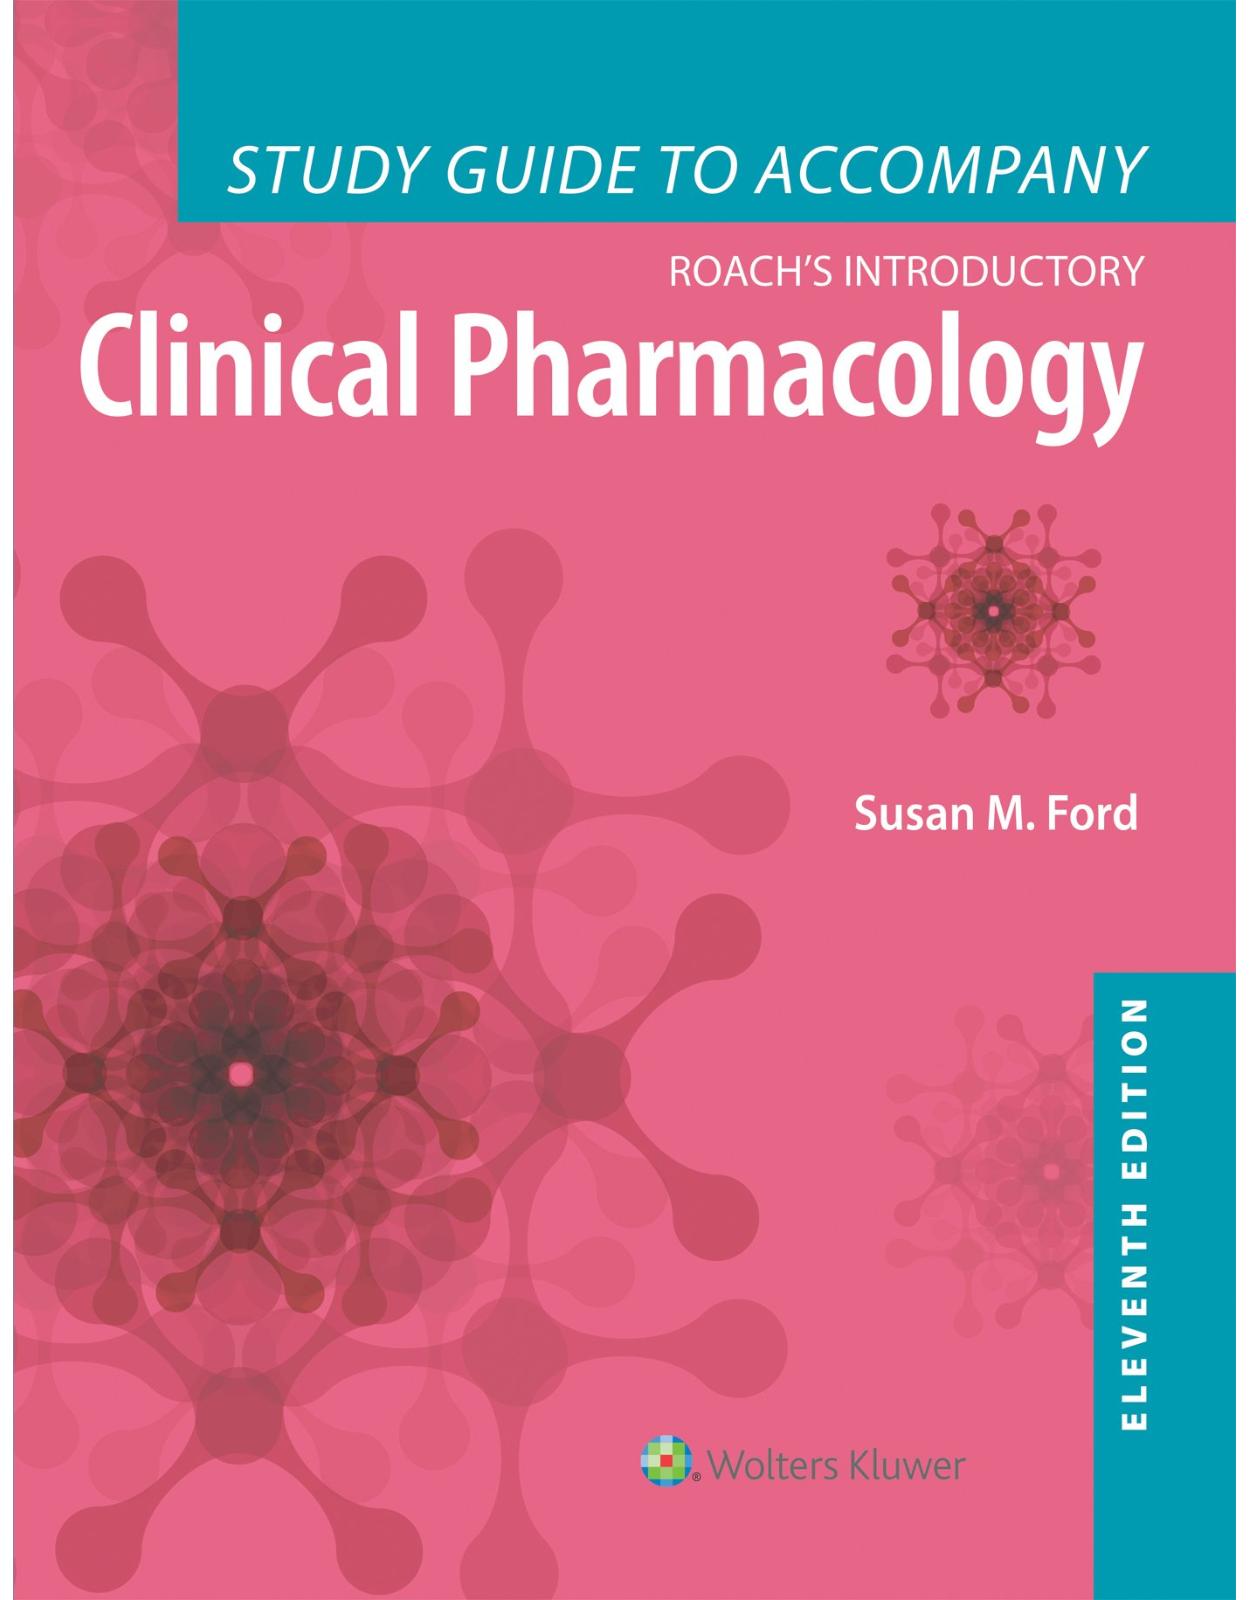 Study Guide to Accompany Roach's Introductory Clinical Pharmacology 